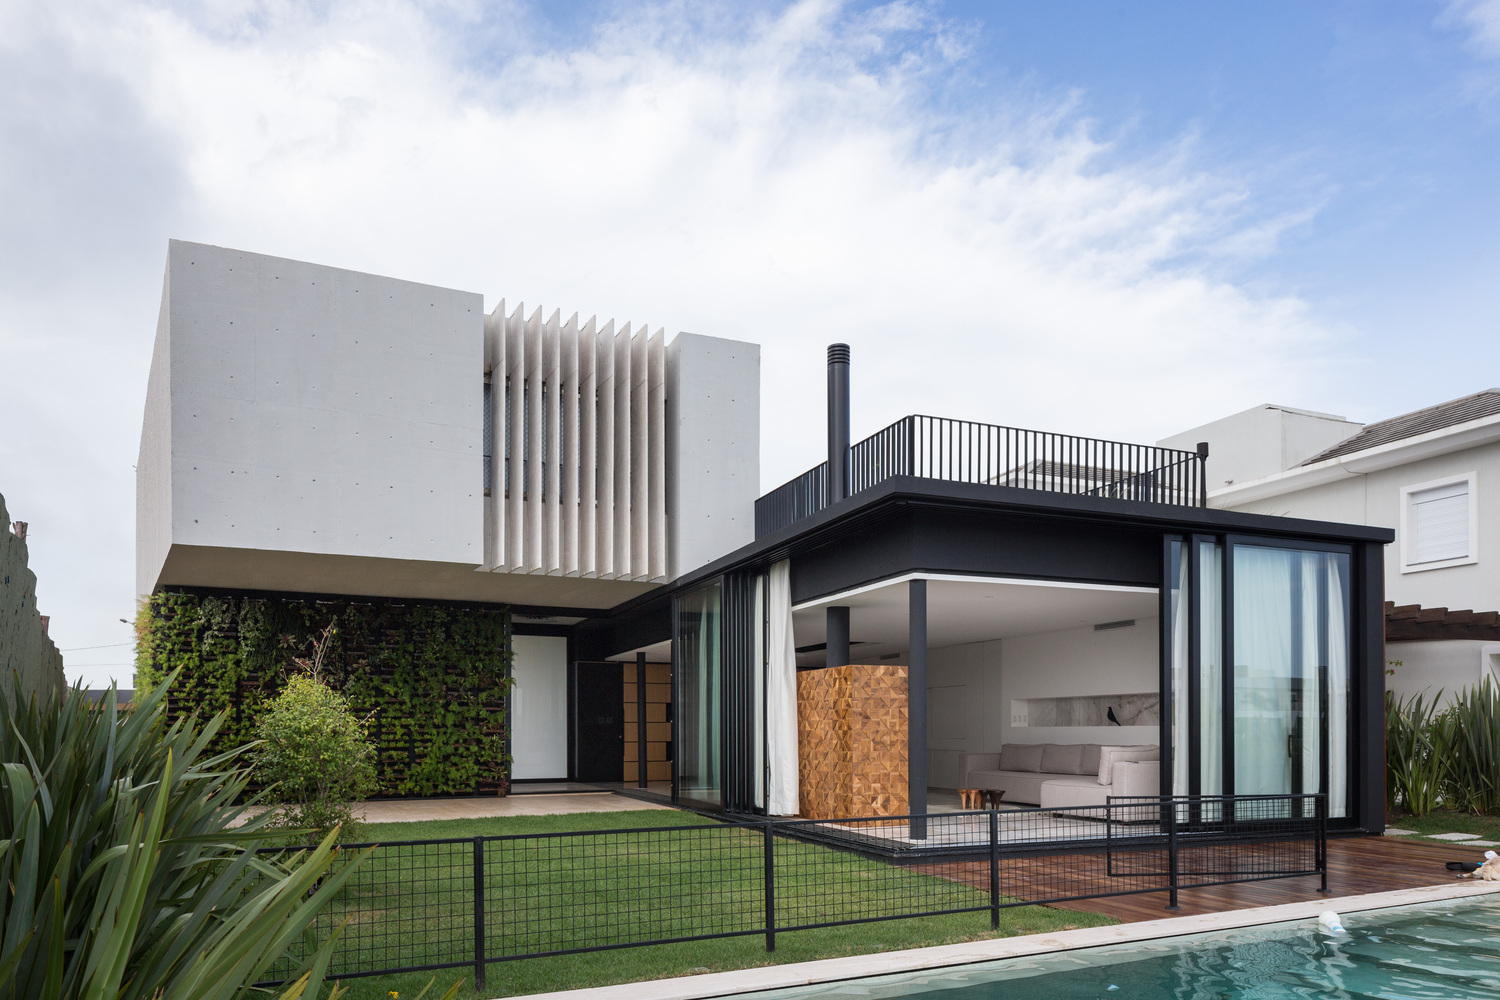 General 1500x1000 house modern architecture